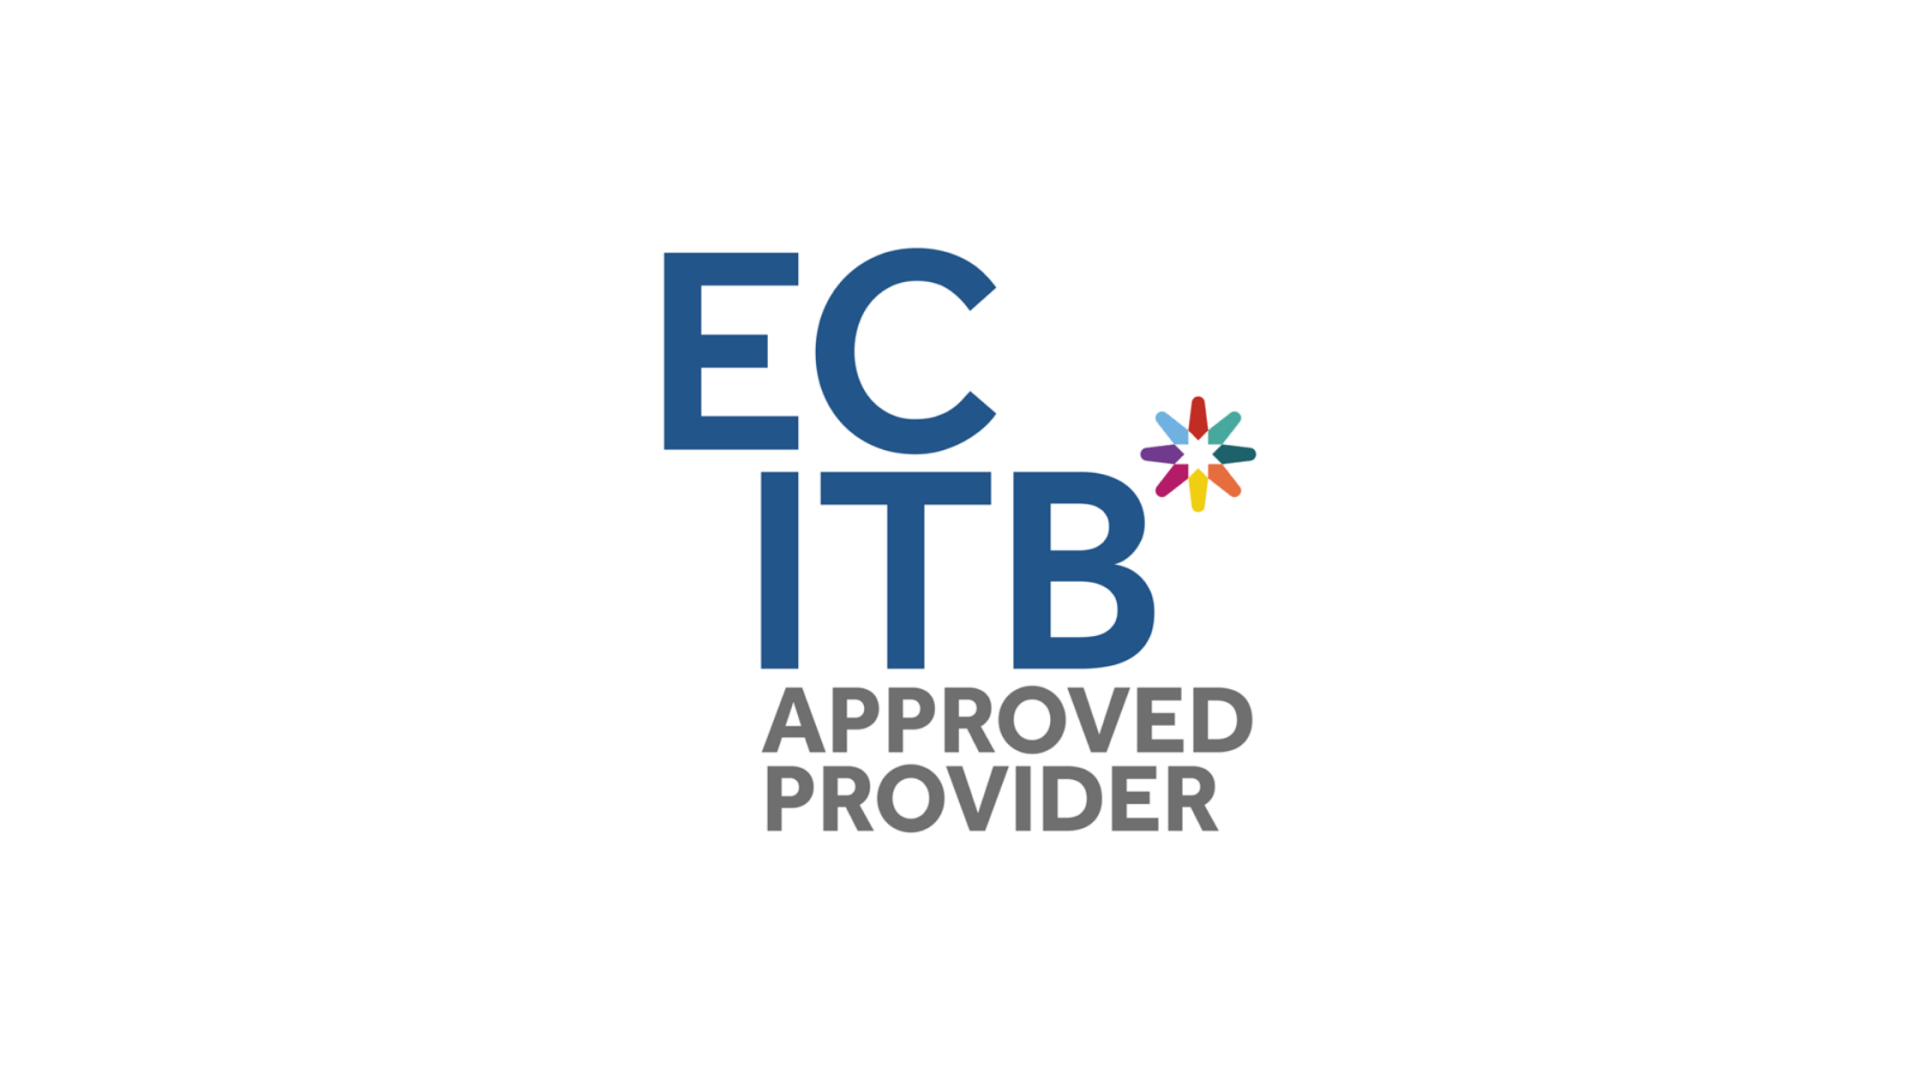 Finalist ECITB Approved Provider